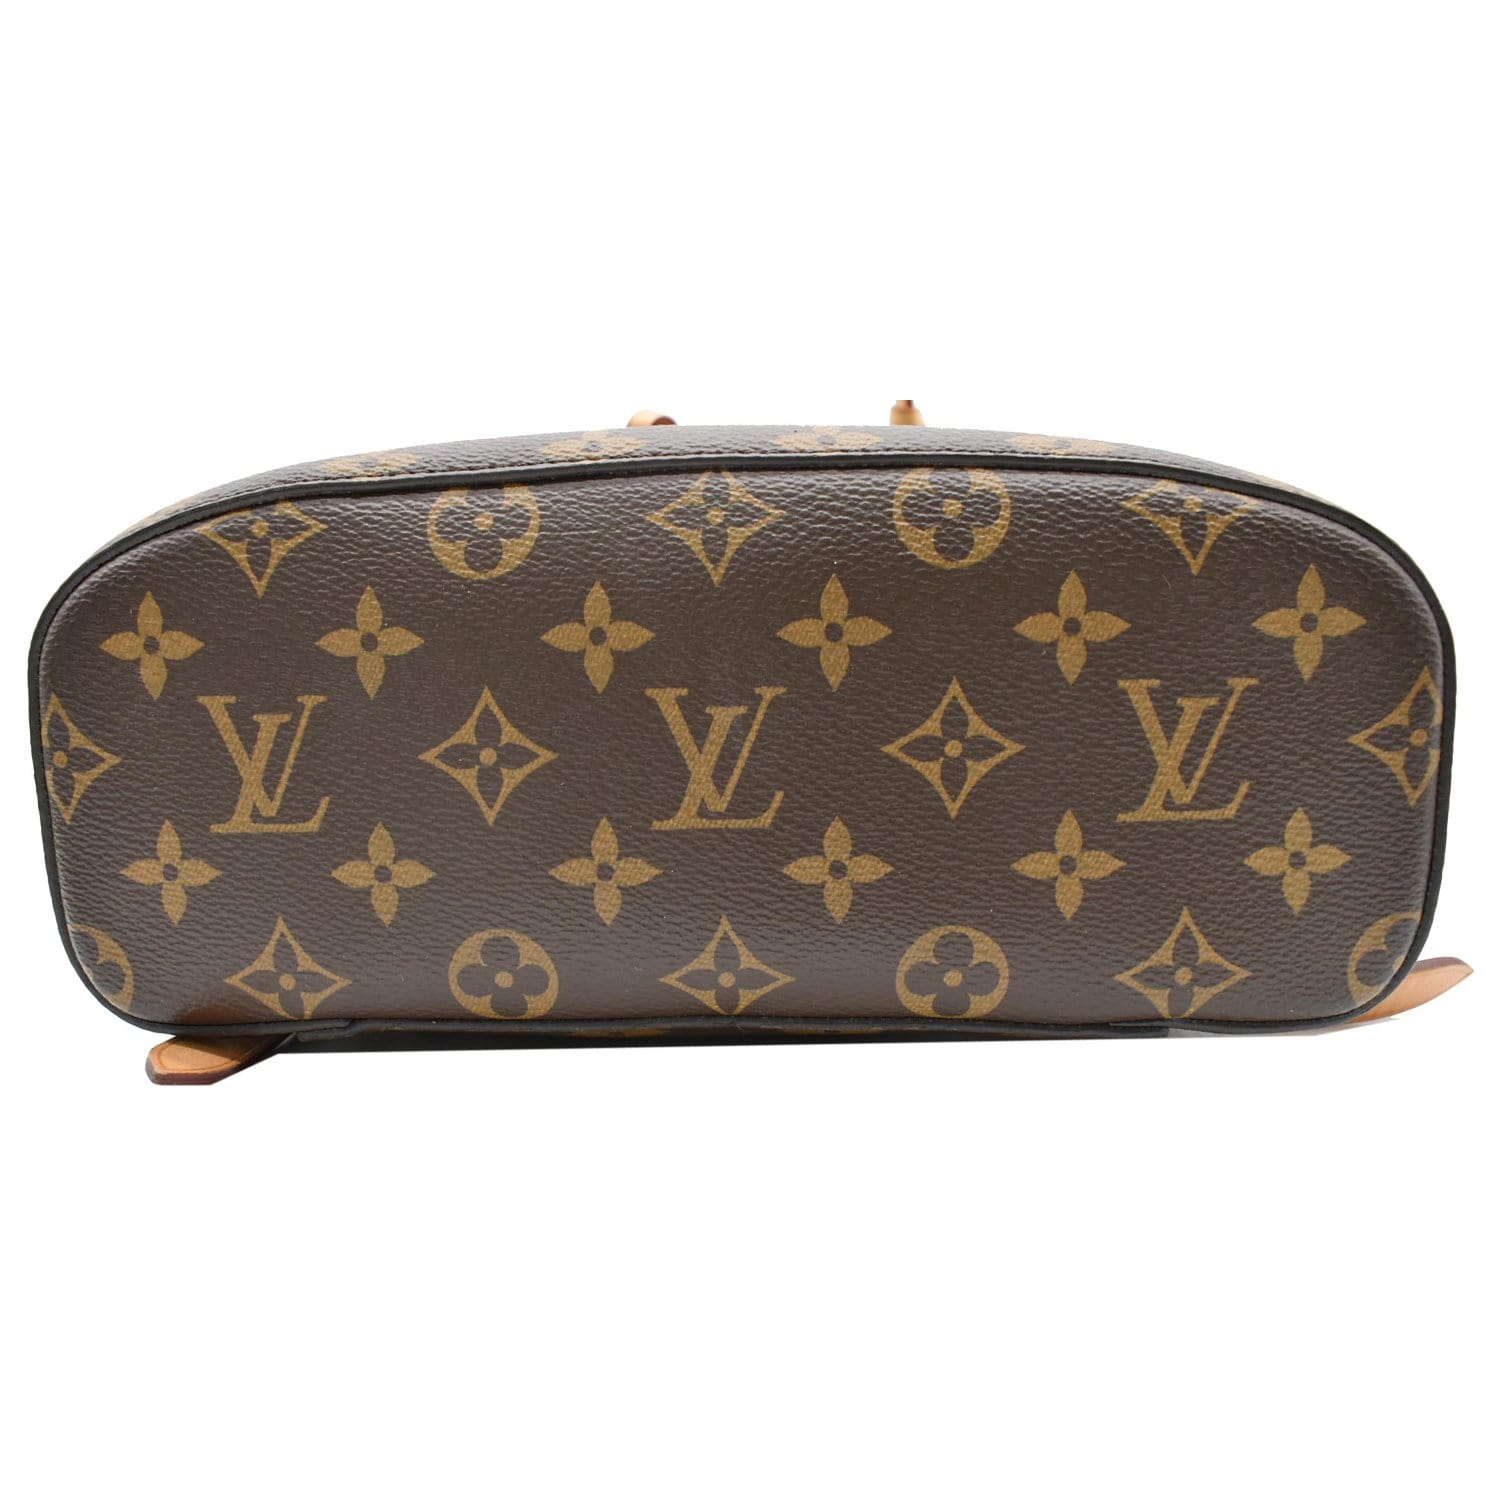 Back - Montsouris - Louis - Bag - Pack - Take a look at the full Louis  Vuitton LV2 x NIGO lookbook in the gallery just below - M51136 – dct -  ep_vintage luxury Store - Monogram - Vuitton - MM